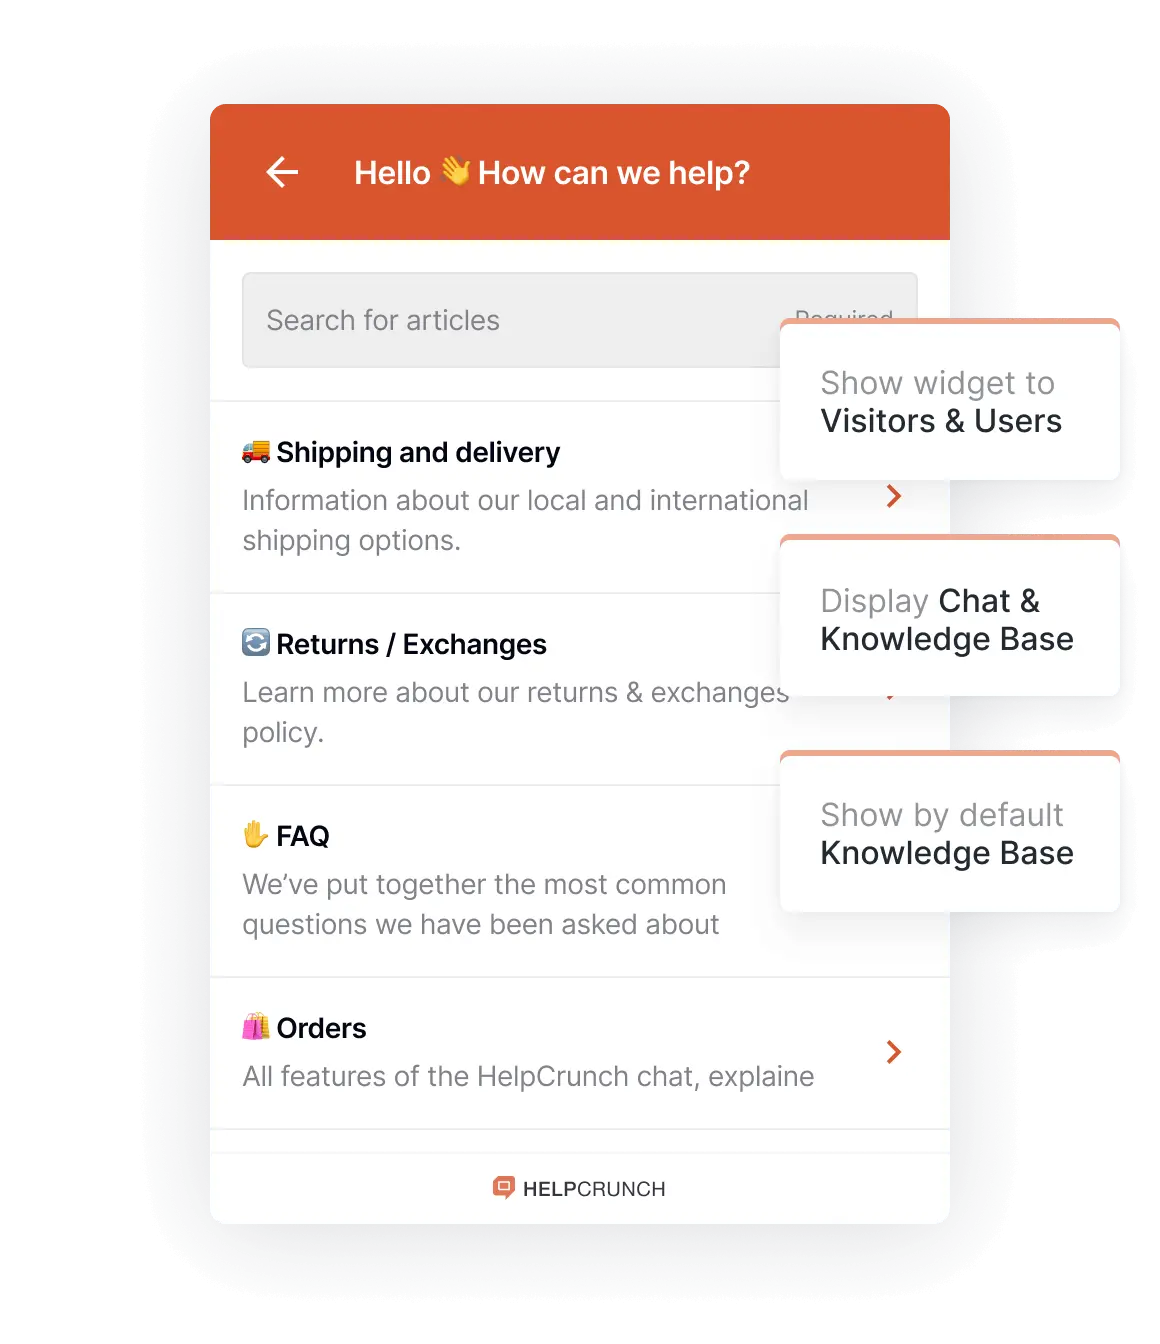 Knowledge base integrated into the live chat widget by HelpCrunch